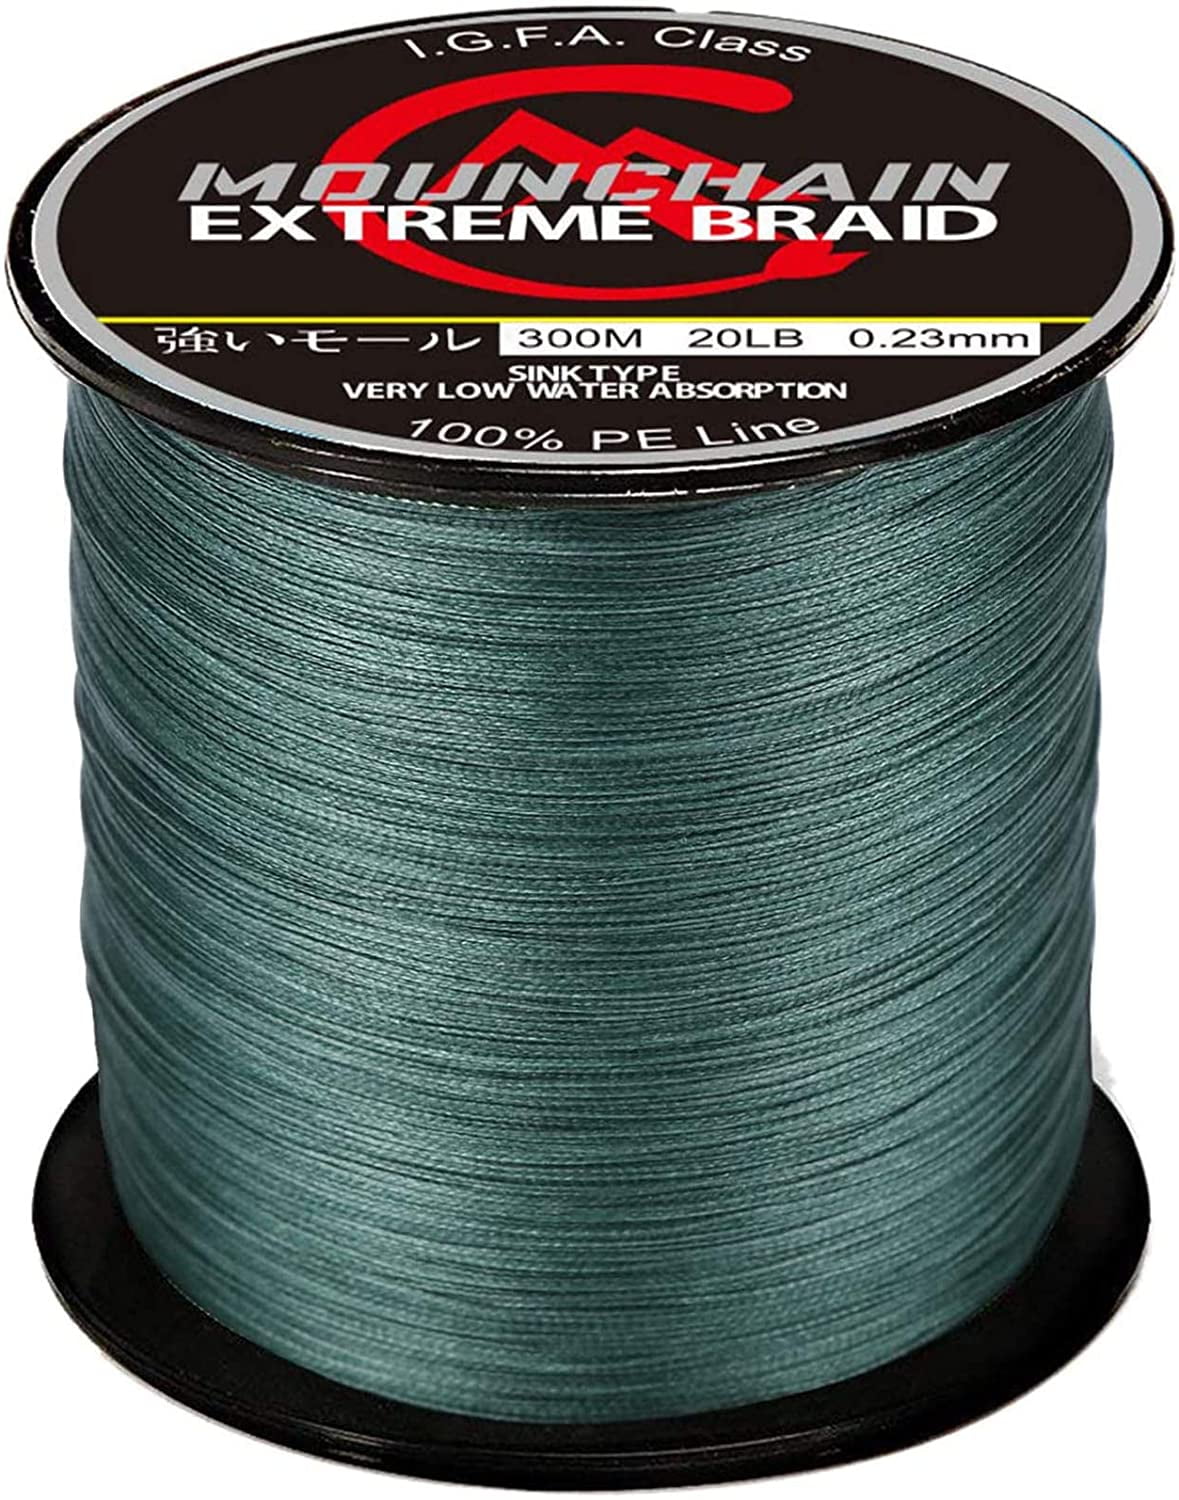 High Sensitivity and Zero Stretch Abrasion Resistant Braided Lines mpeter Armor Braided Fishing Line 4 Strands to 8 Strands with Smaller Diameter 